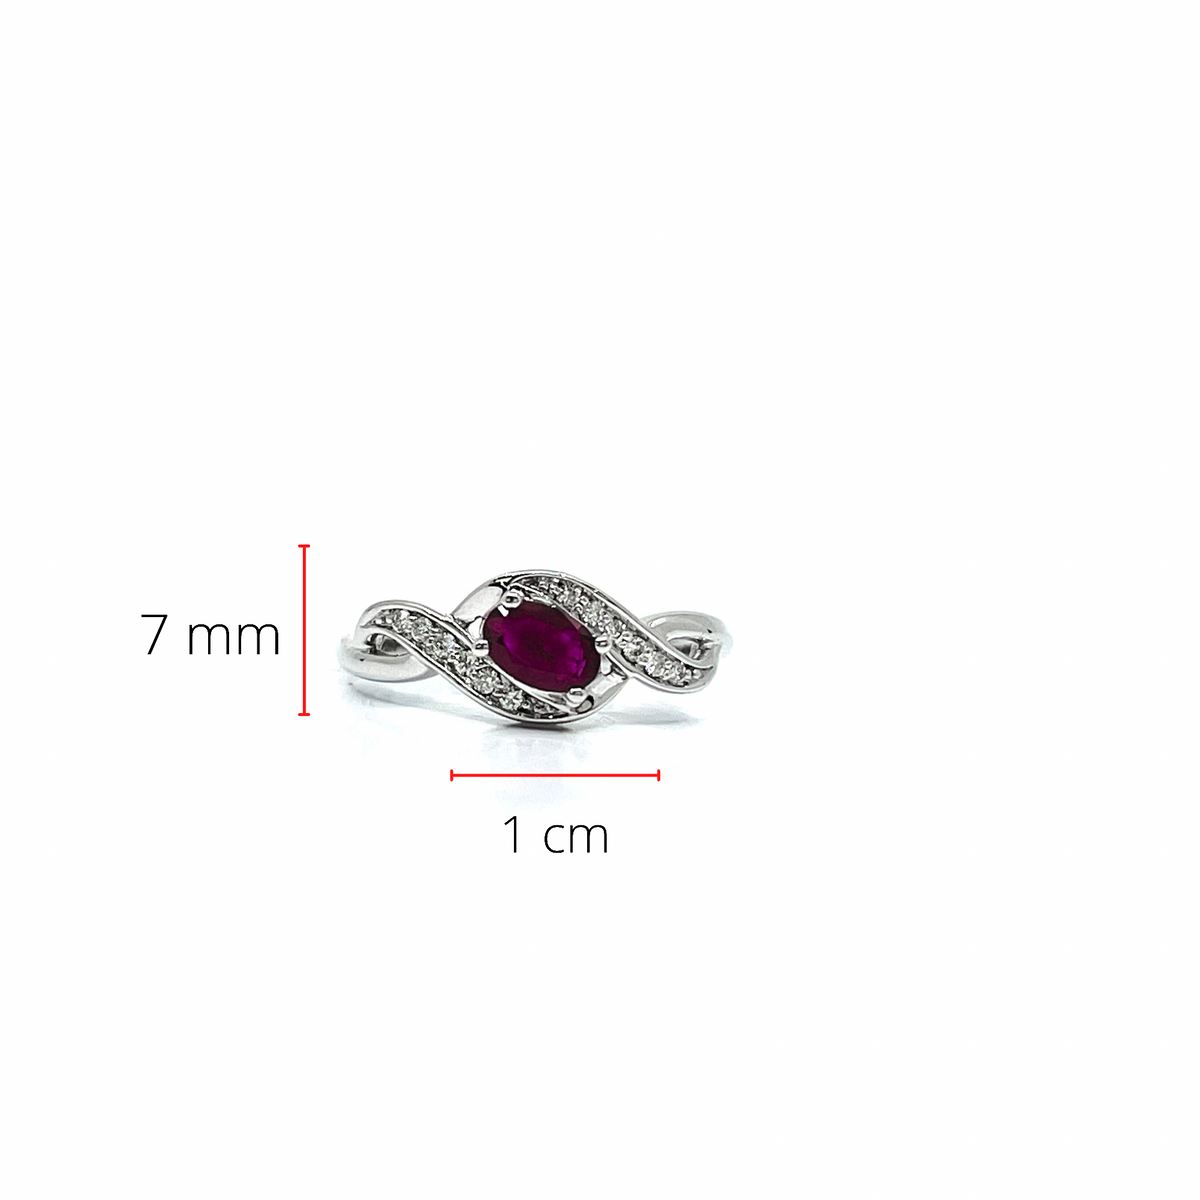 10K White Gold 0.09cttw Diamond with 0.60cttw Ruby Ring - Size 6.5